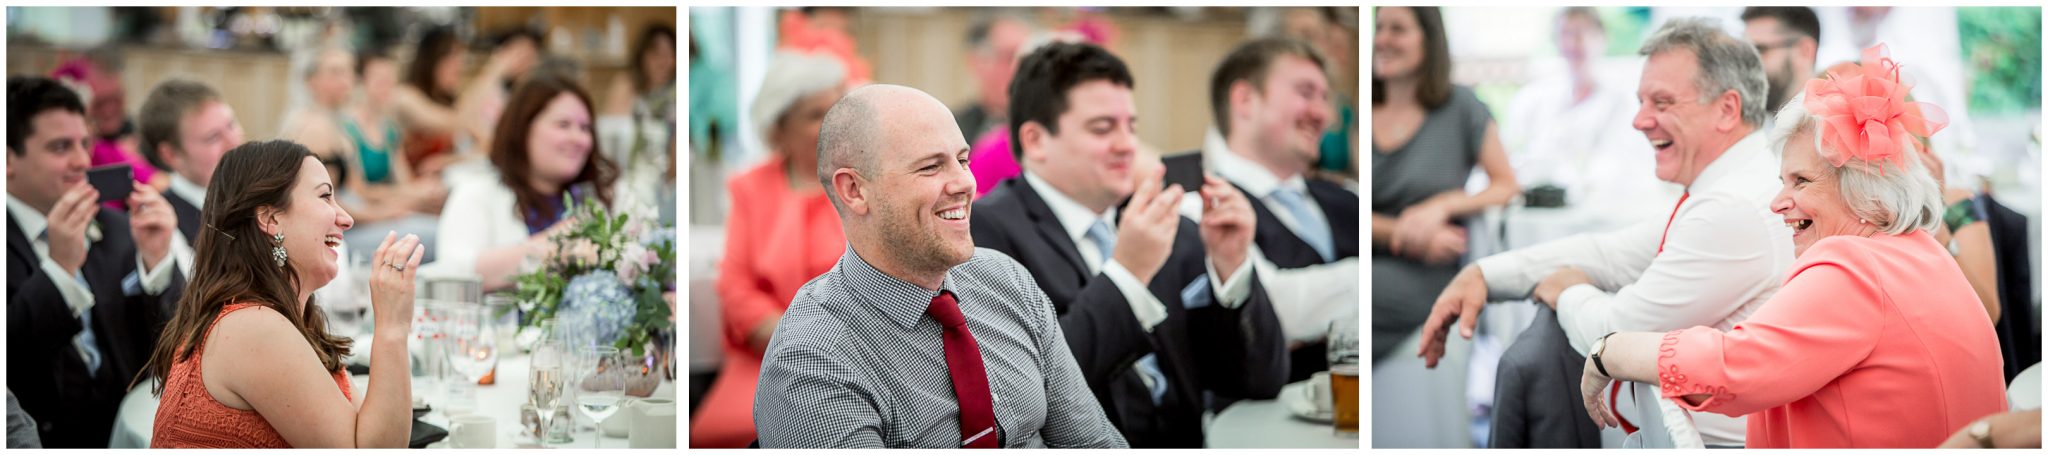 Oakley Hall wedding photography guests aughint at speeches